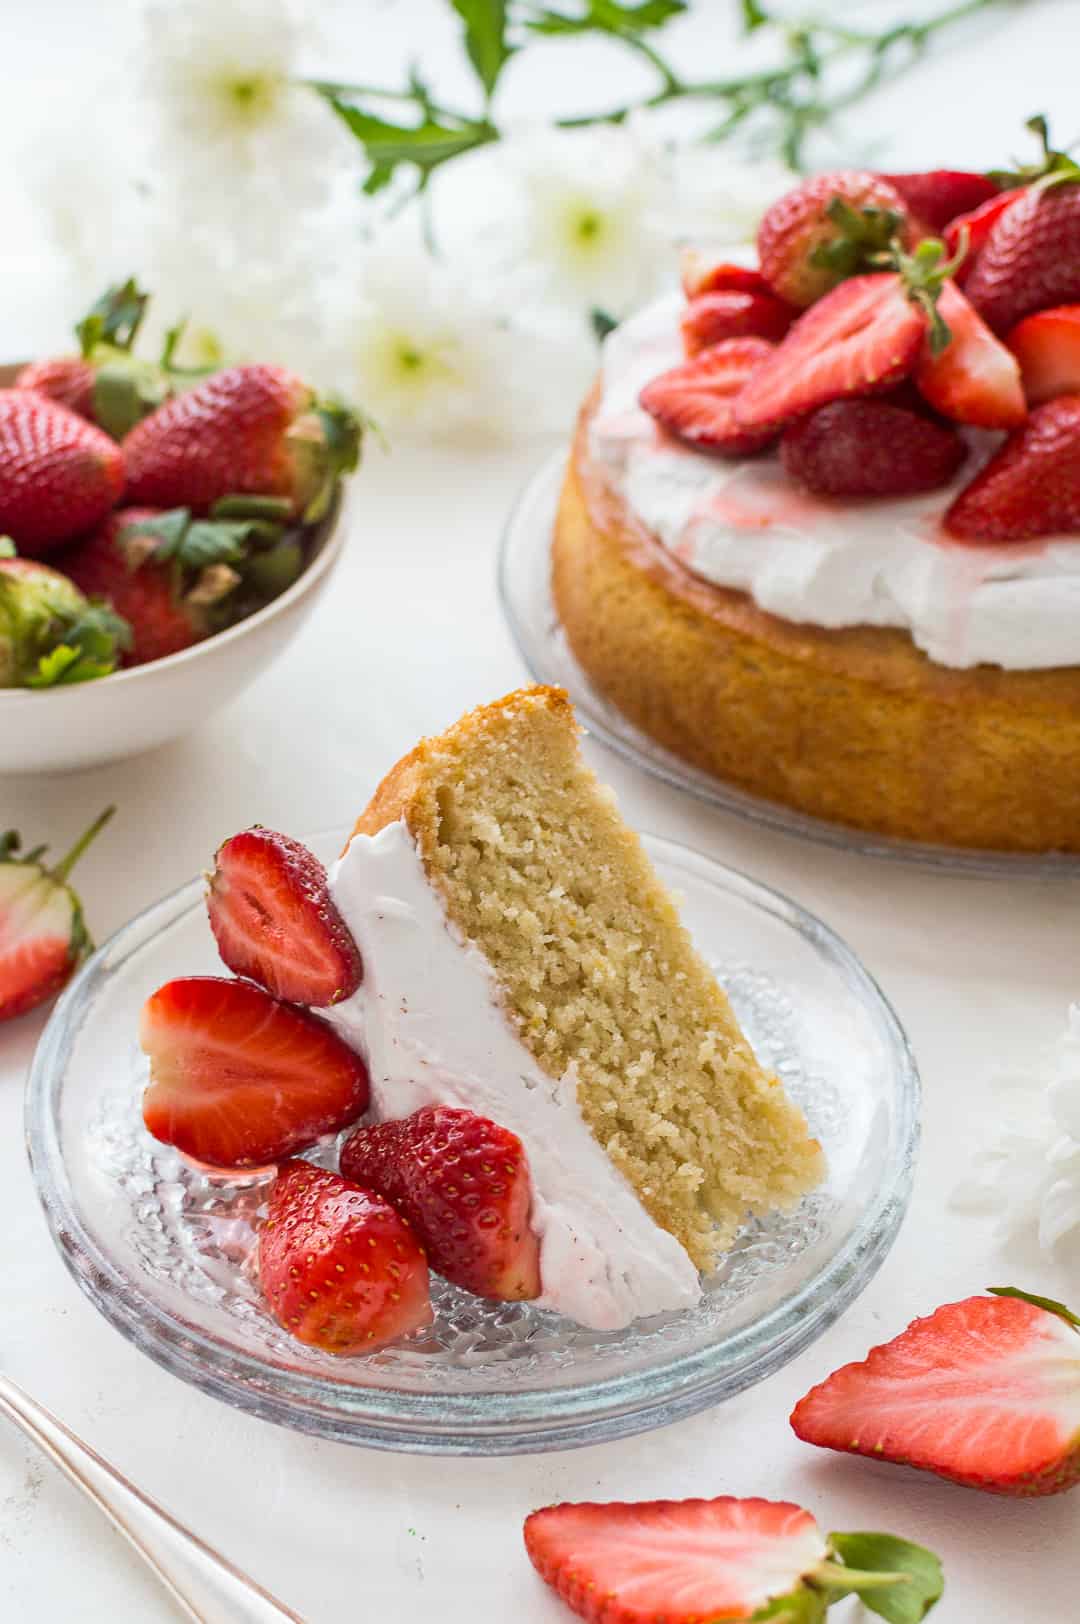 A slice of vegan lemon and almond cake with coconut whipped cream and strawberries.